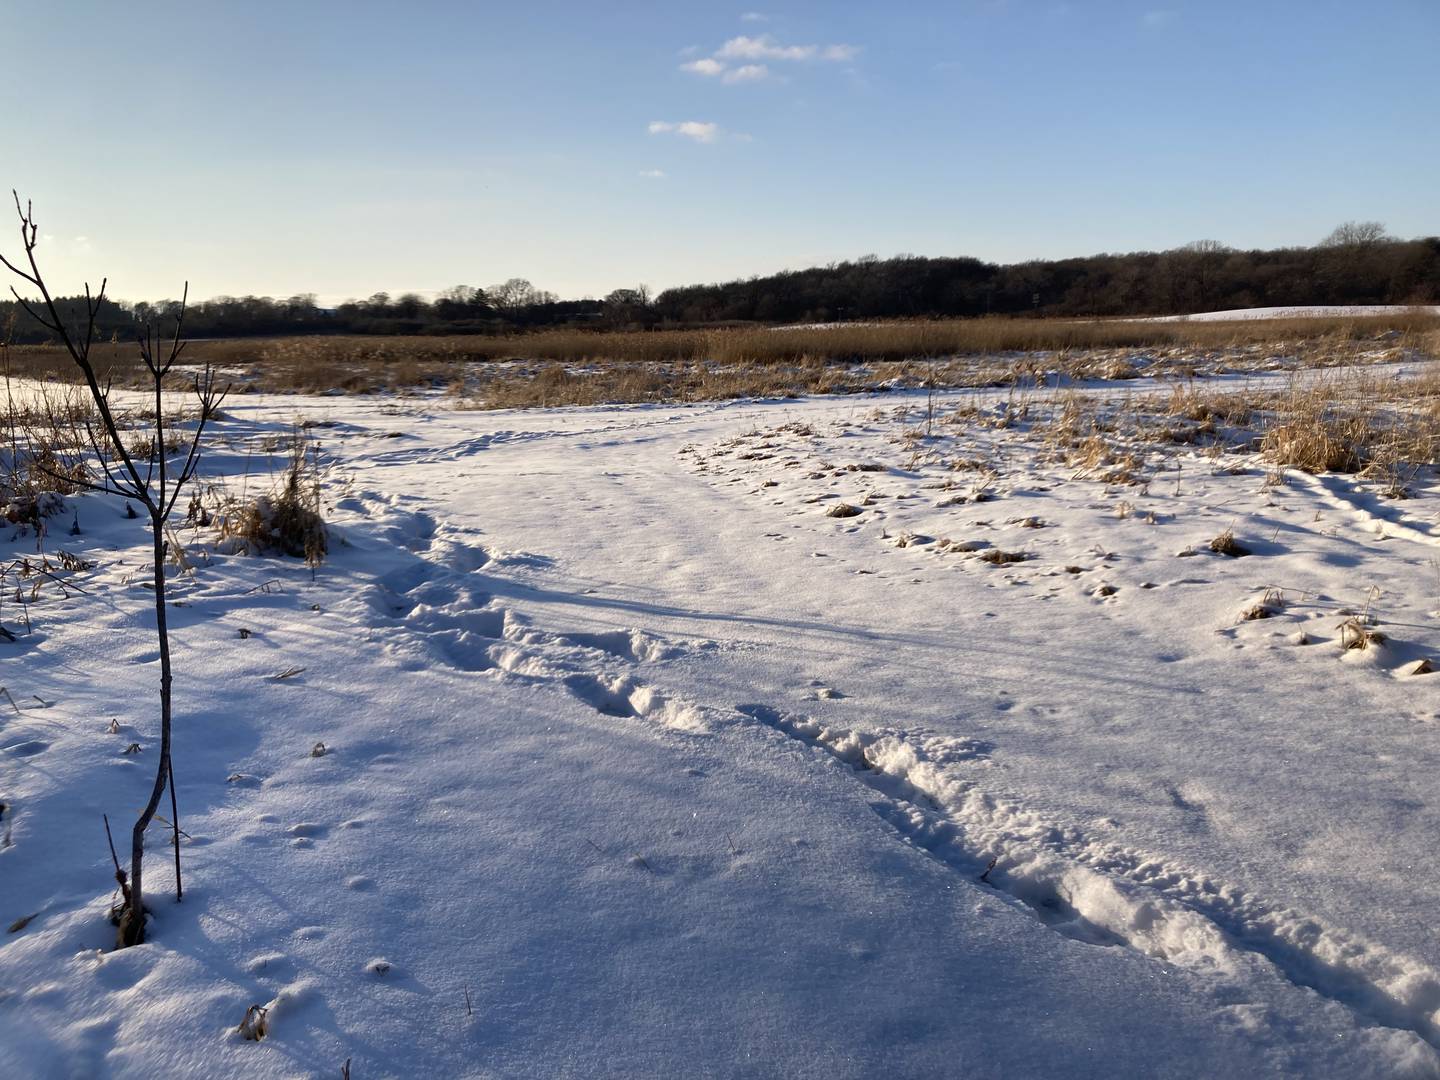 The Land Conservancy of McHenry County recently acquired 300 acres of land near Bull Valley. The nonprofit organization has plans to turn the land into a nature park, while preserving its five miles of bridle trails.